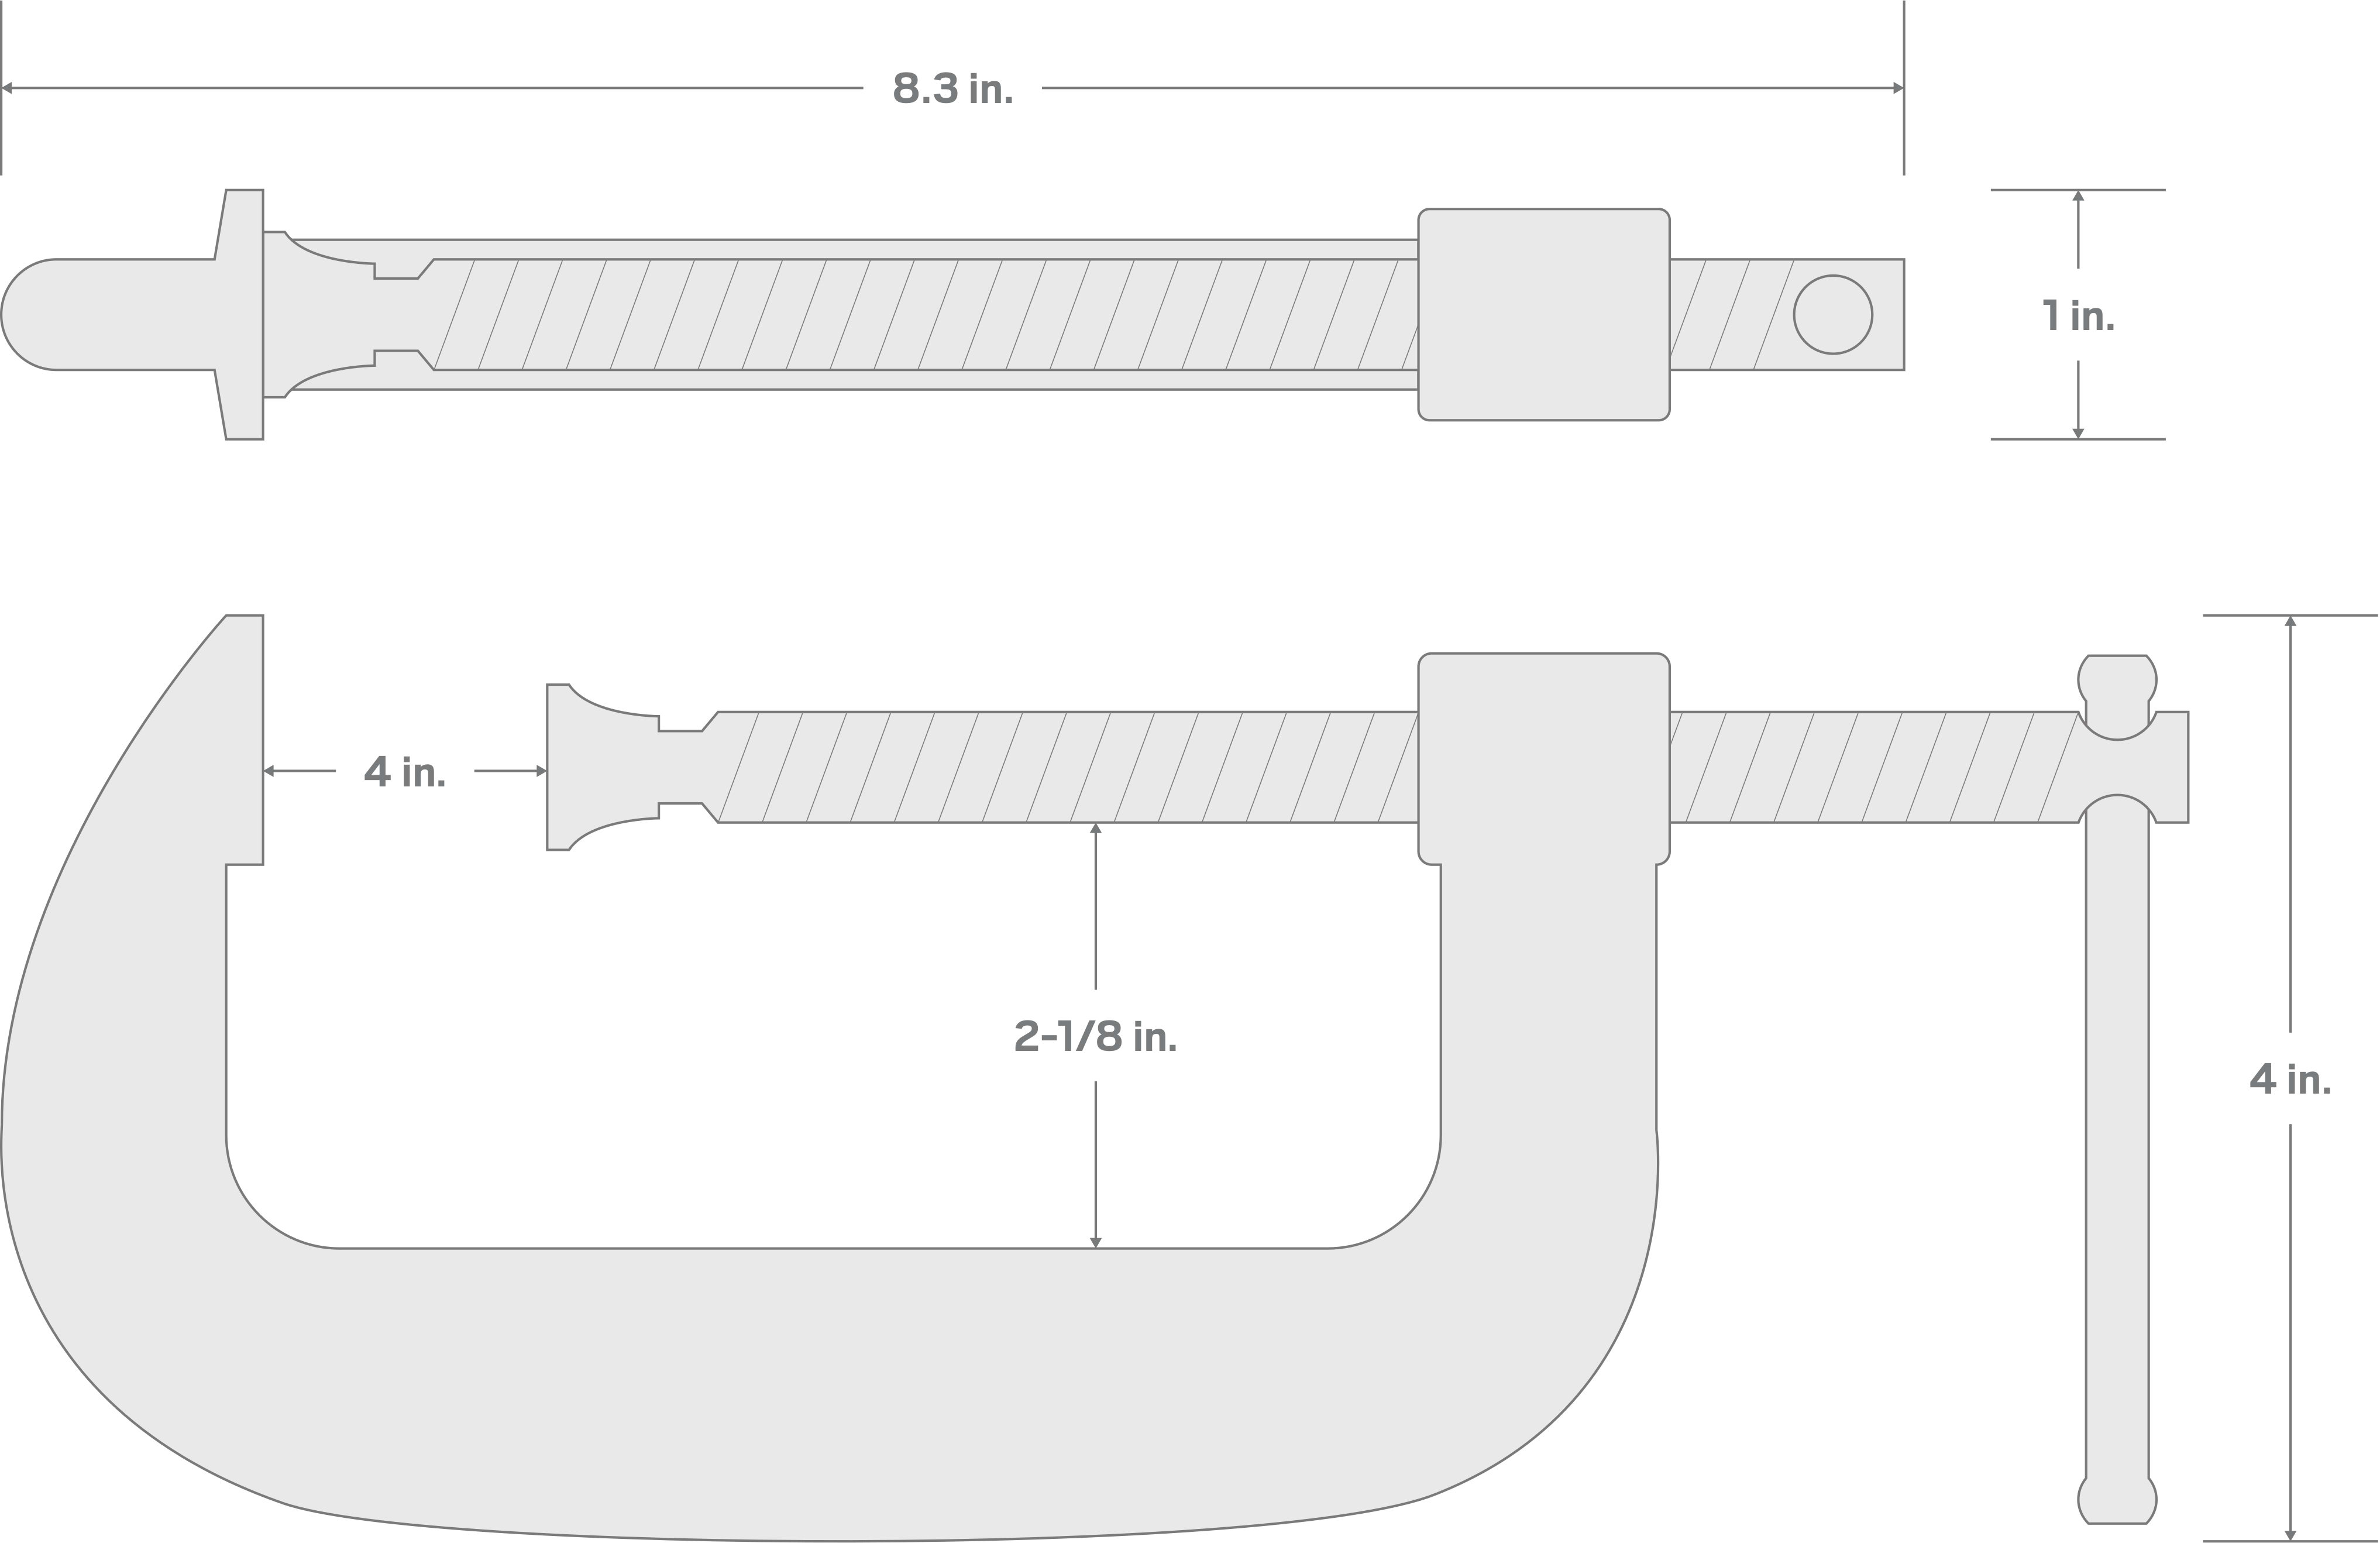 Specs for 4 Inch Malleable Iron C-Clamp